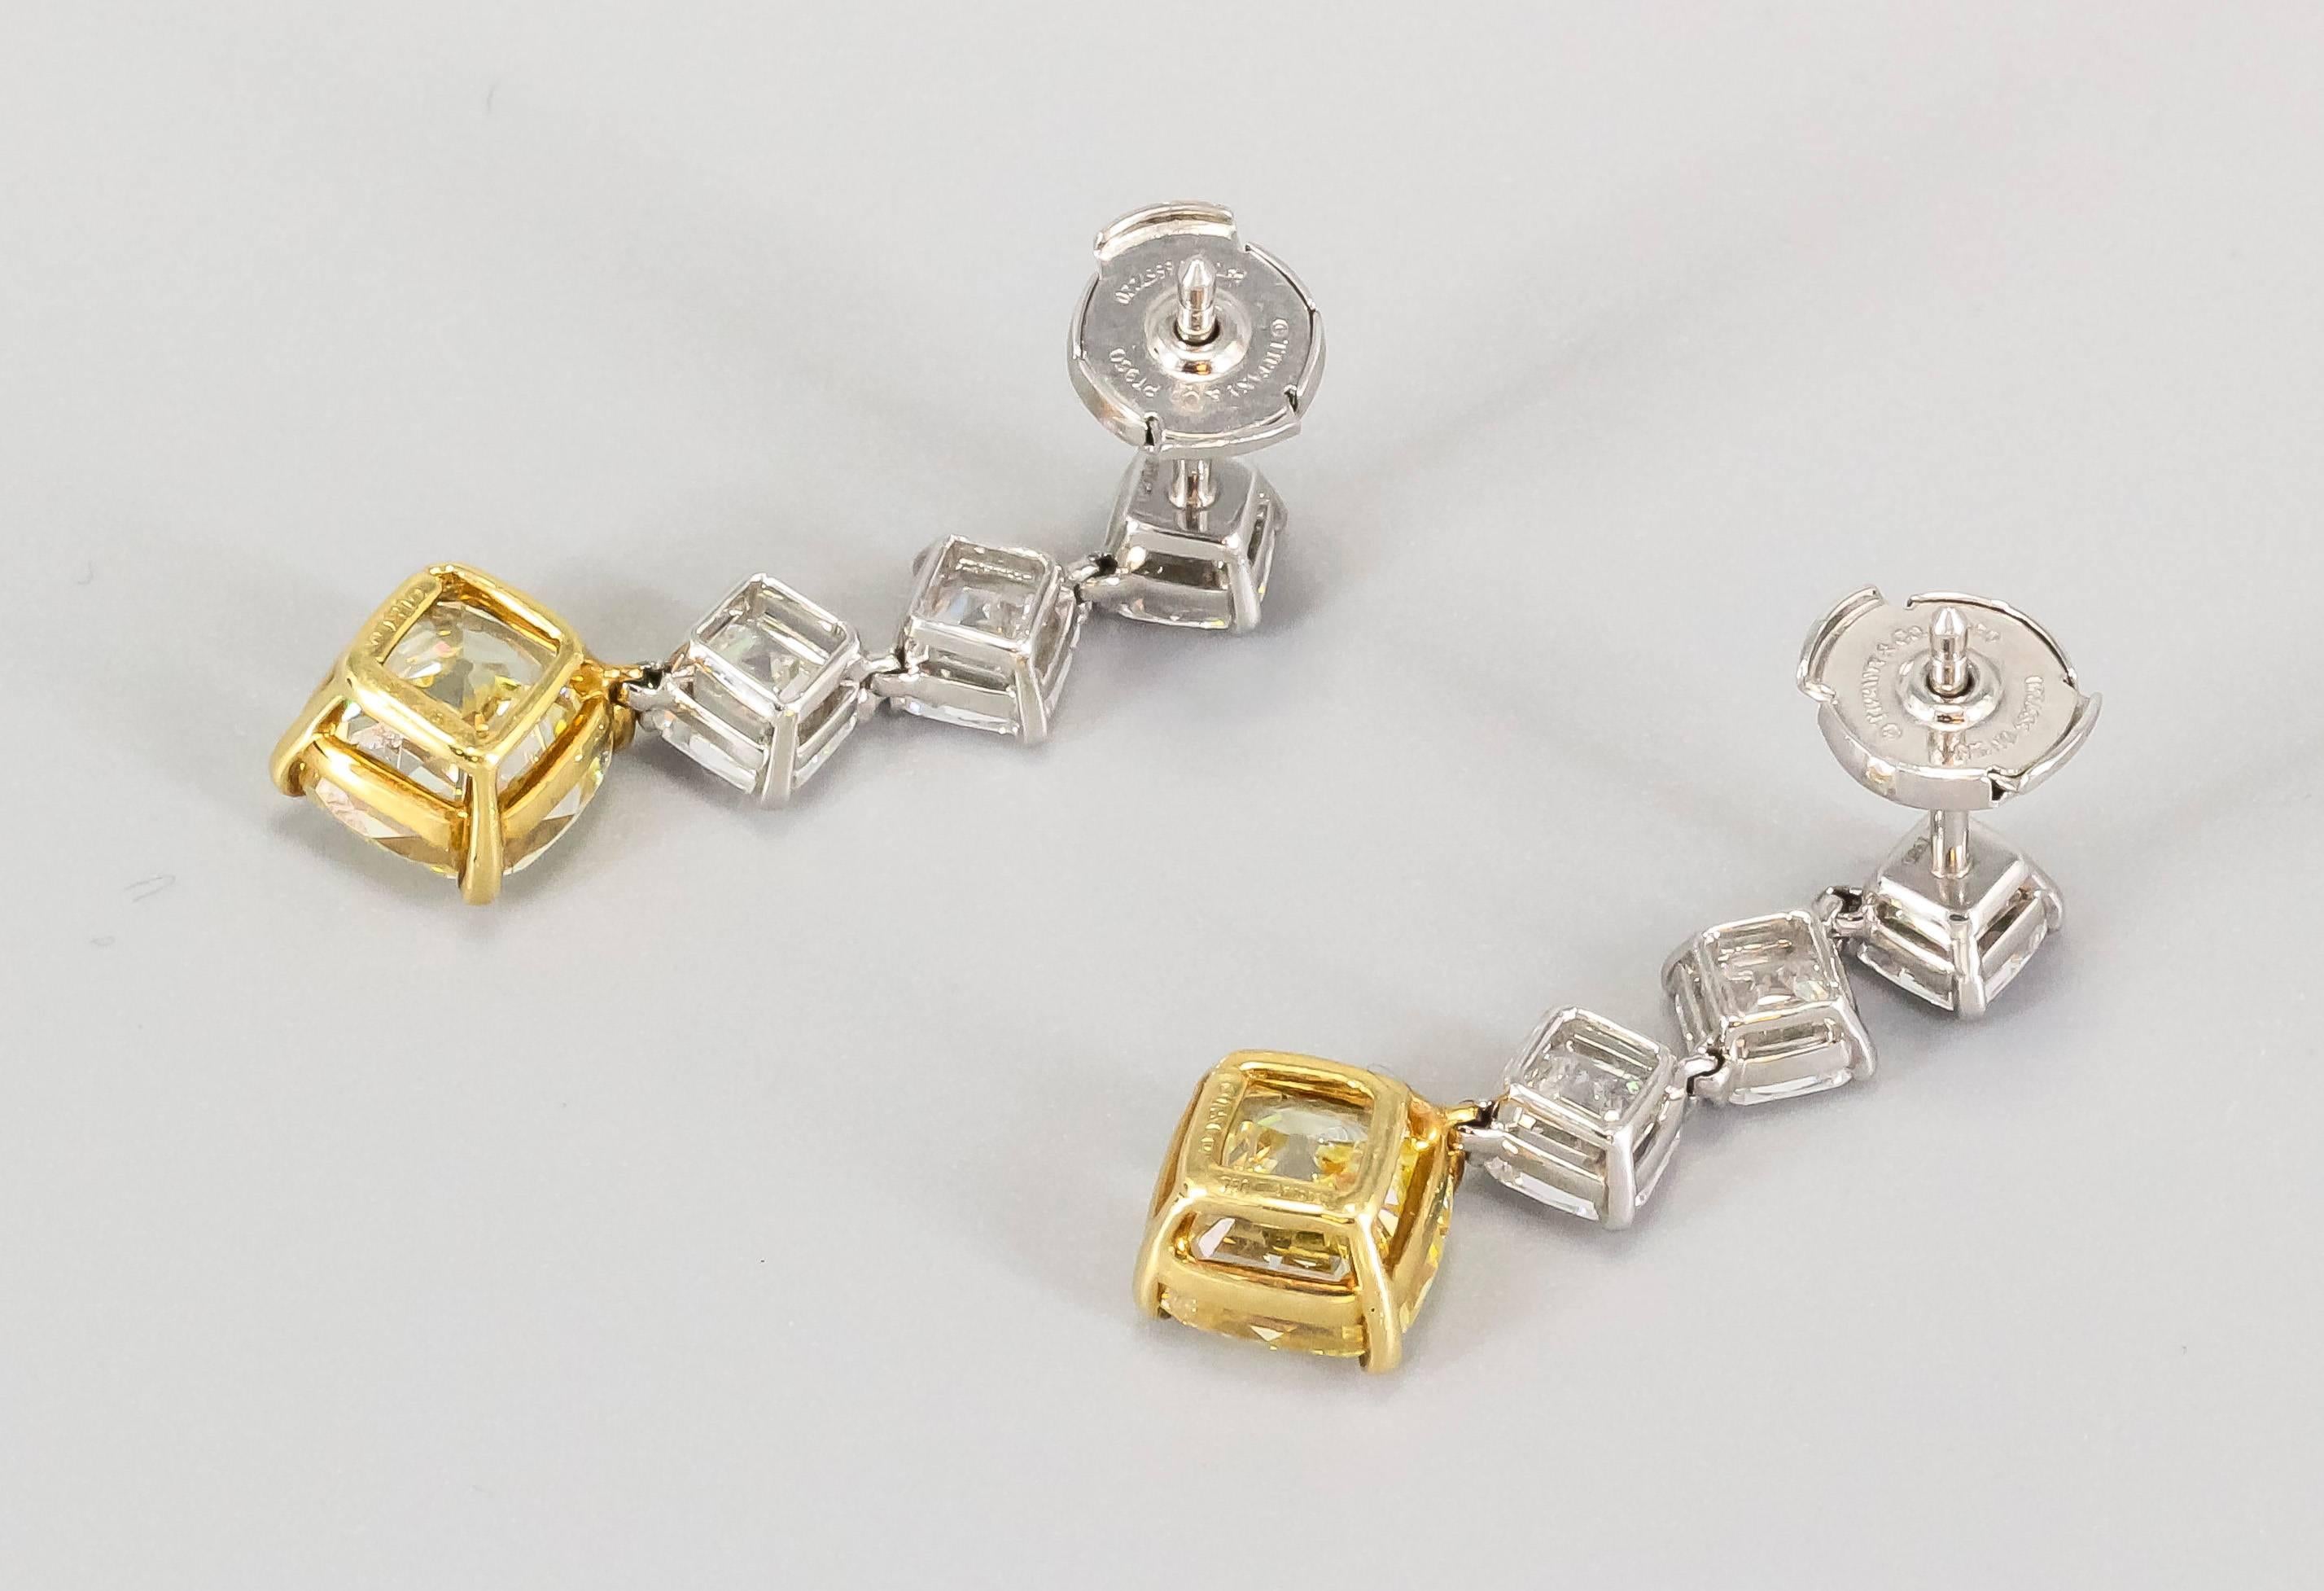 Important white and fancy intense yellow diamond  platinum and 18K yellow gold drop earrings from the "Legacy" collection by Tiffany & Co. These exquisite earrings feature a square antique modified brilliant cut (trademarked by Tiffany